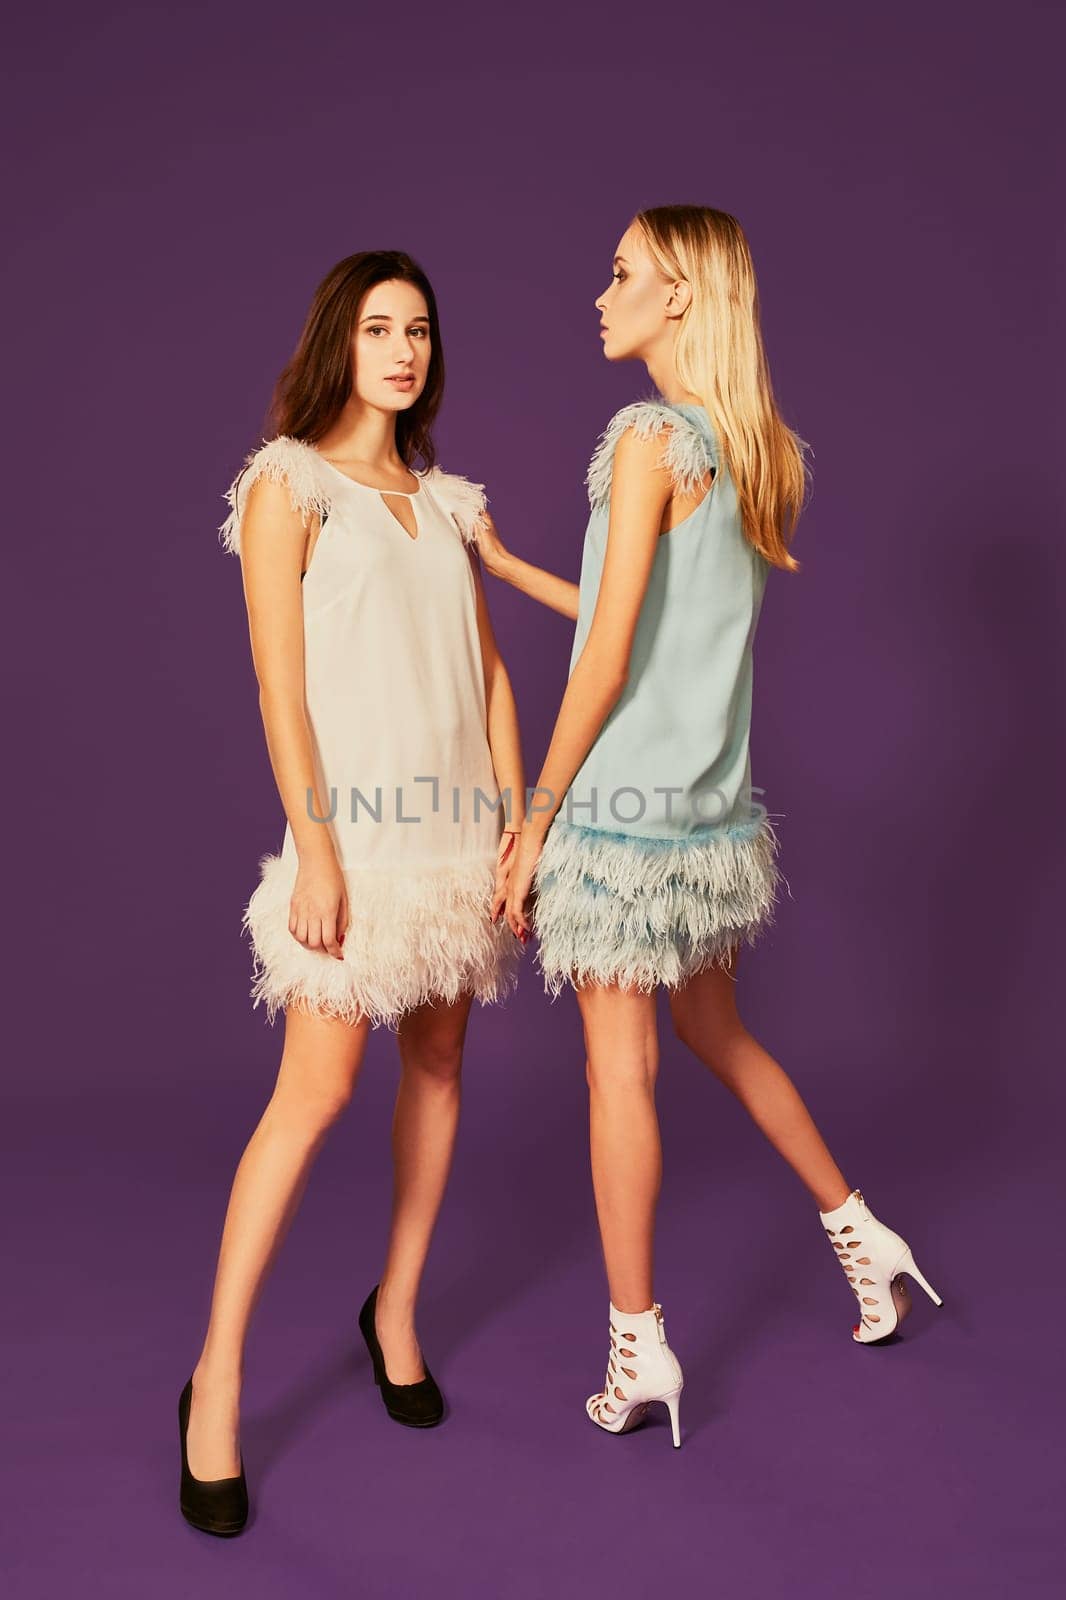 Professional photo of two young women, blonde and brunette, in cocktail dresses posing on purlpe background by nazarovsergey